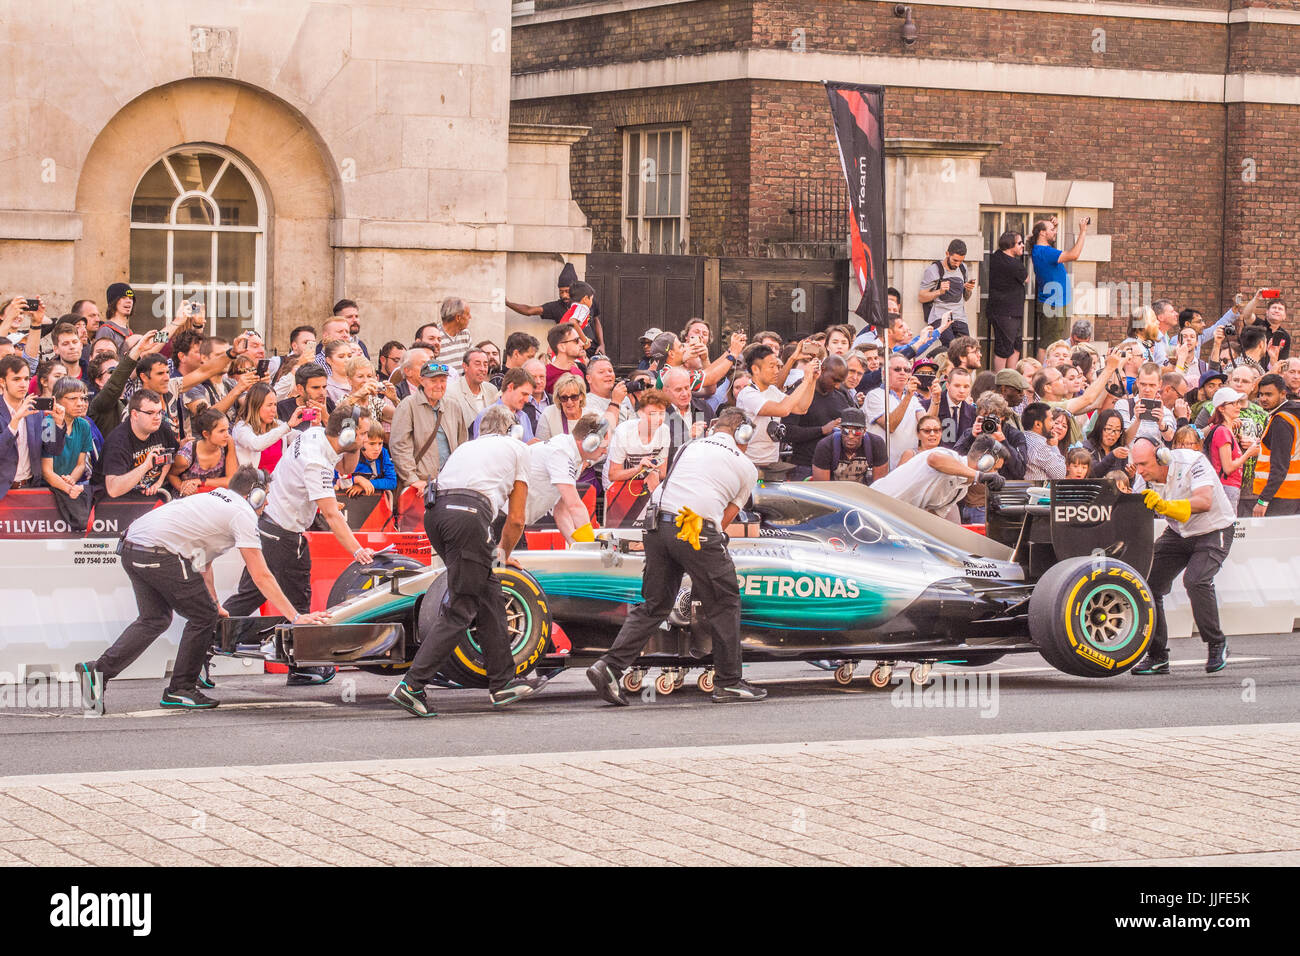 'F1 Live' Event in London with cars being driven along Whitehall Stock Photo